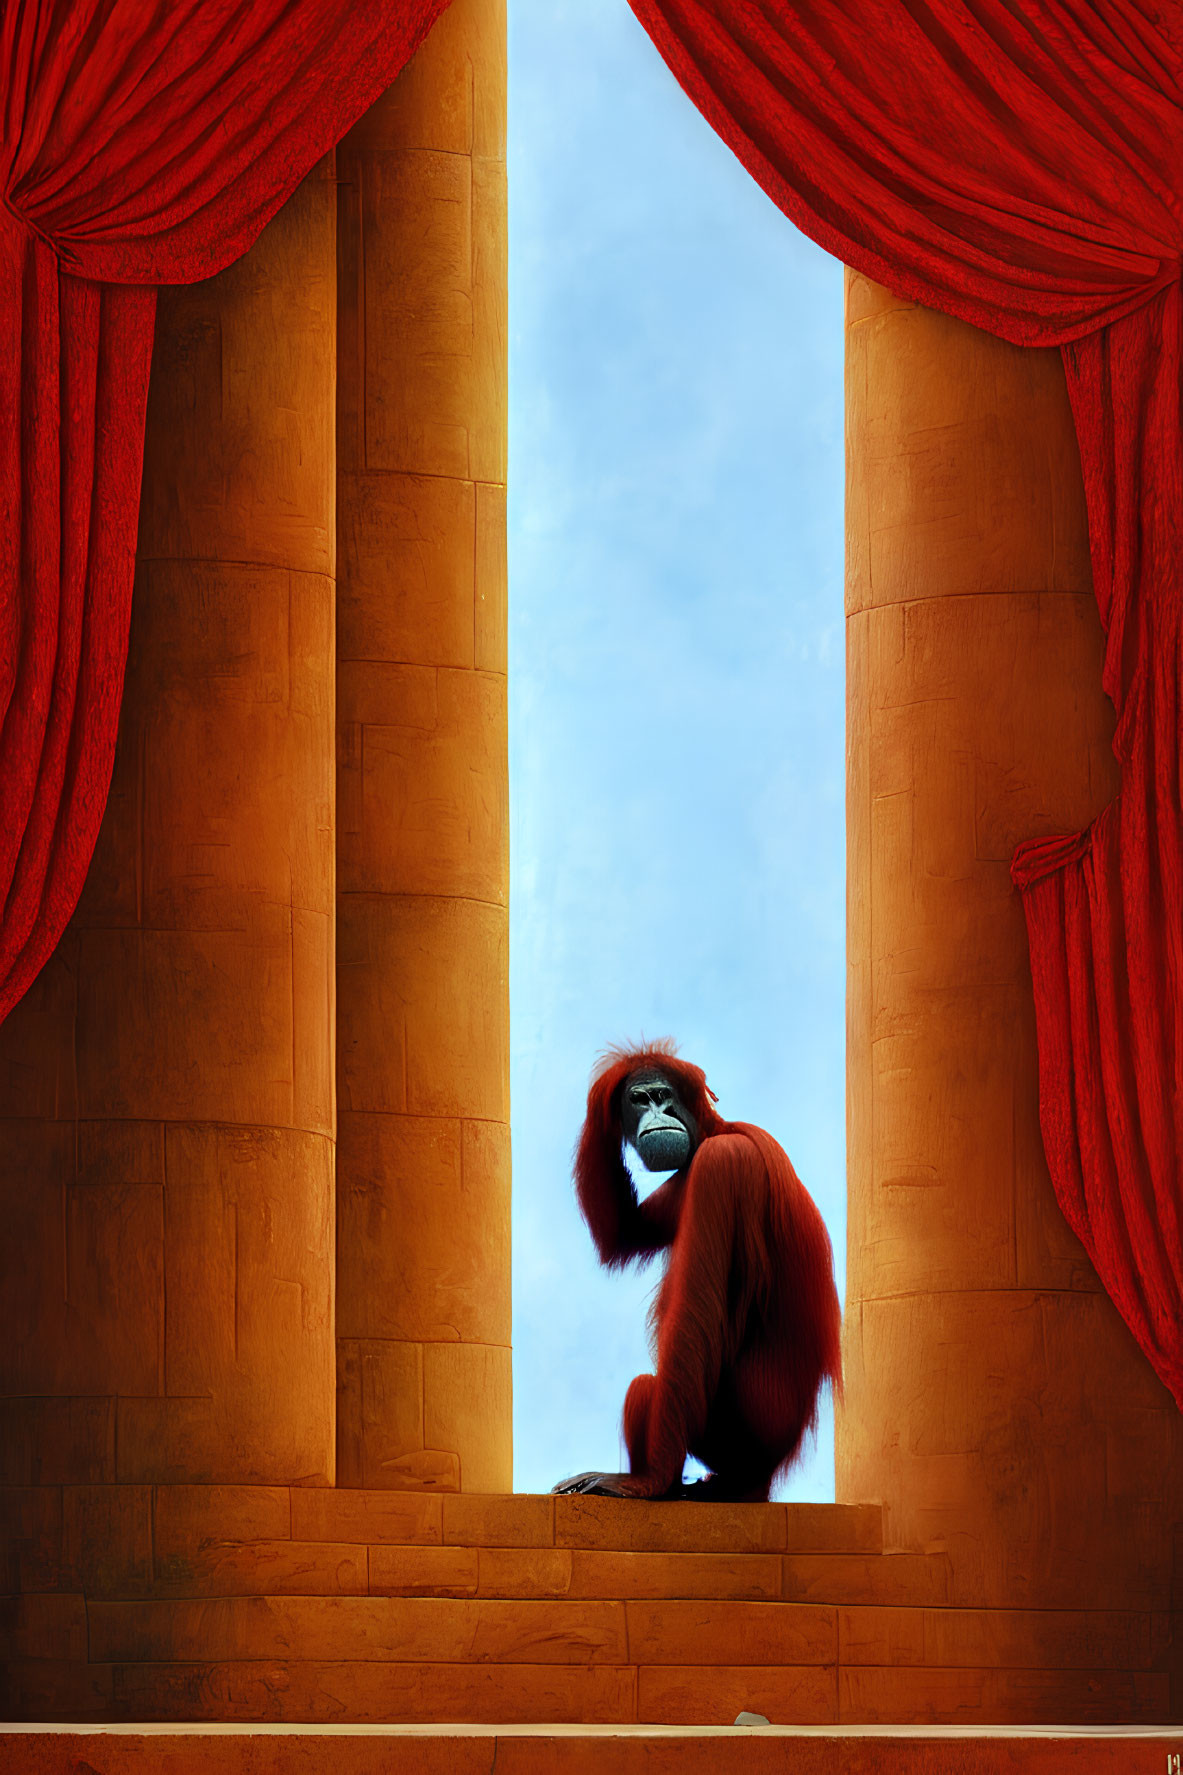 Red-haired orangutan between pillars and red curtains against blue sky.